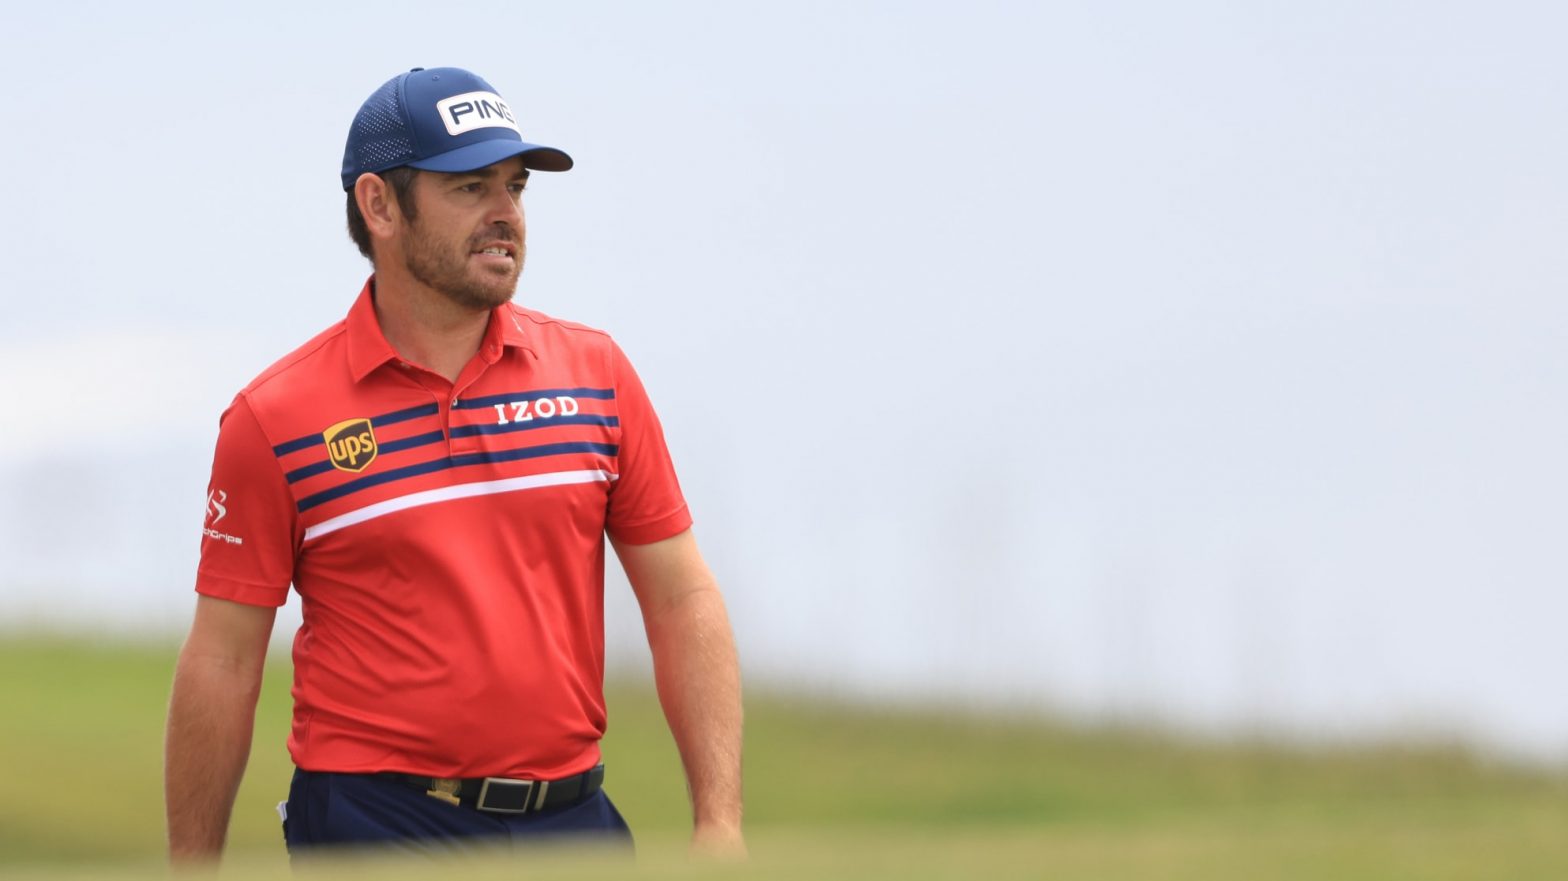 Oosthuizen chasing US Open glory